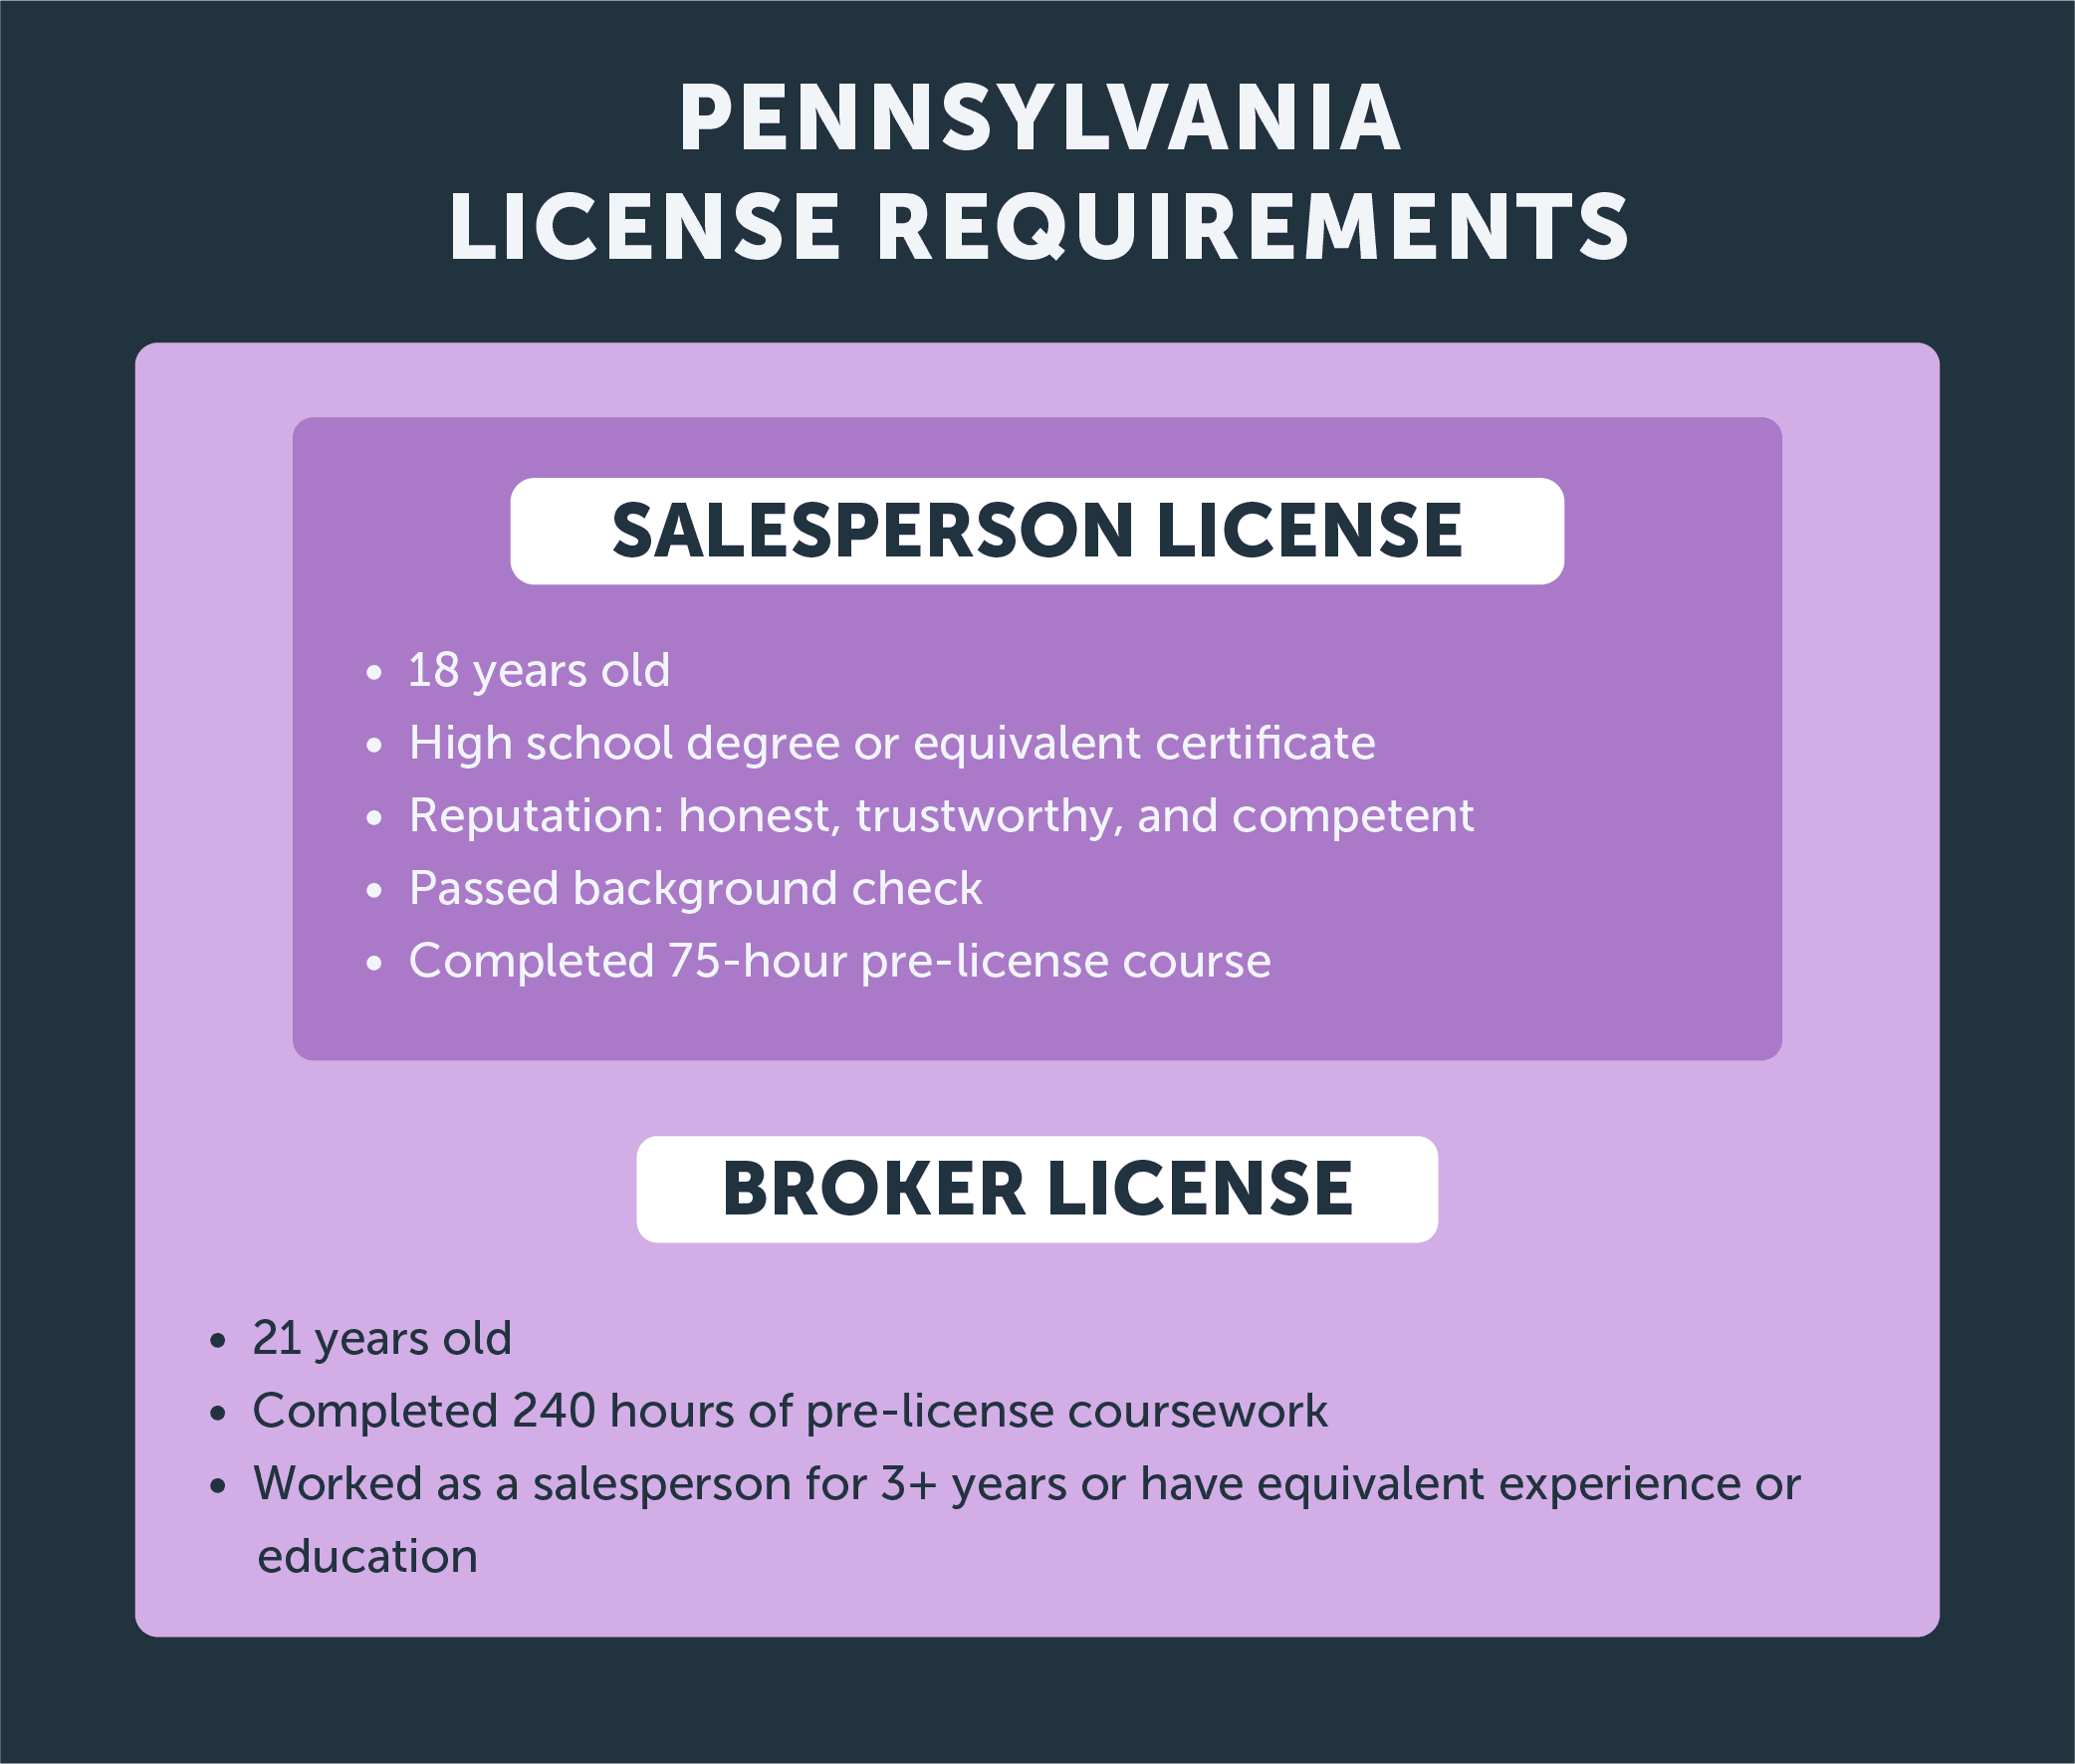 Can I Get a Pennsylvania Real Estate License with a Criminal Record?